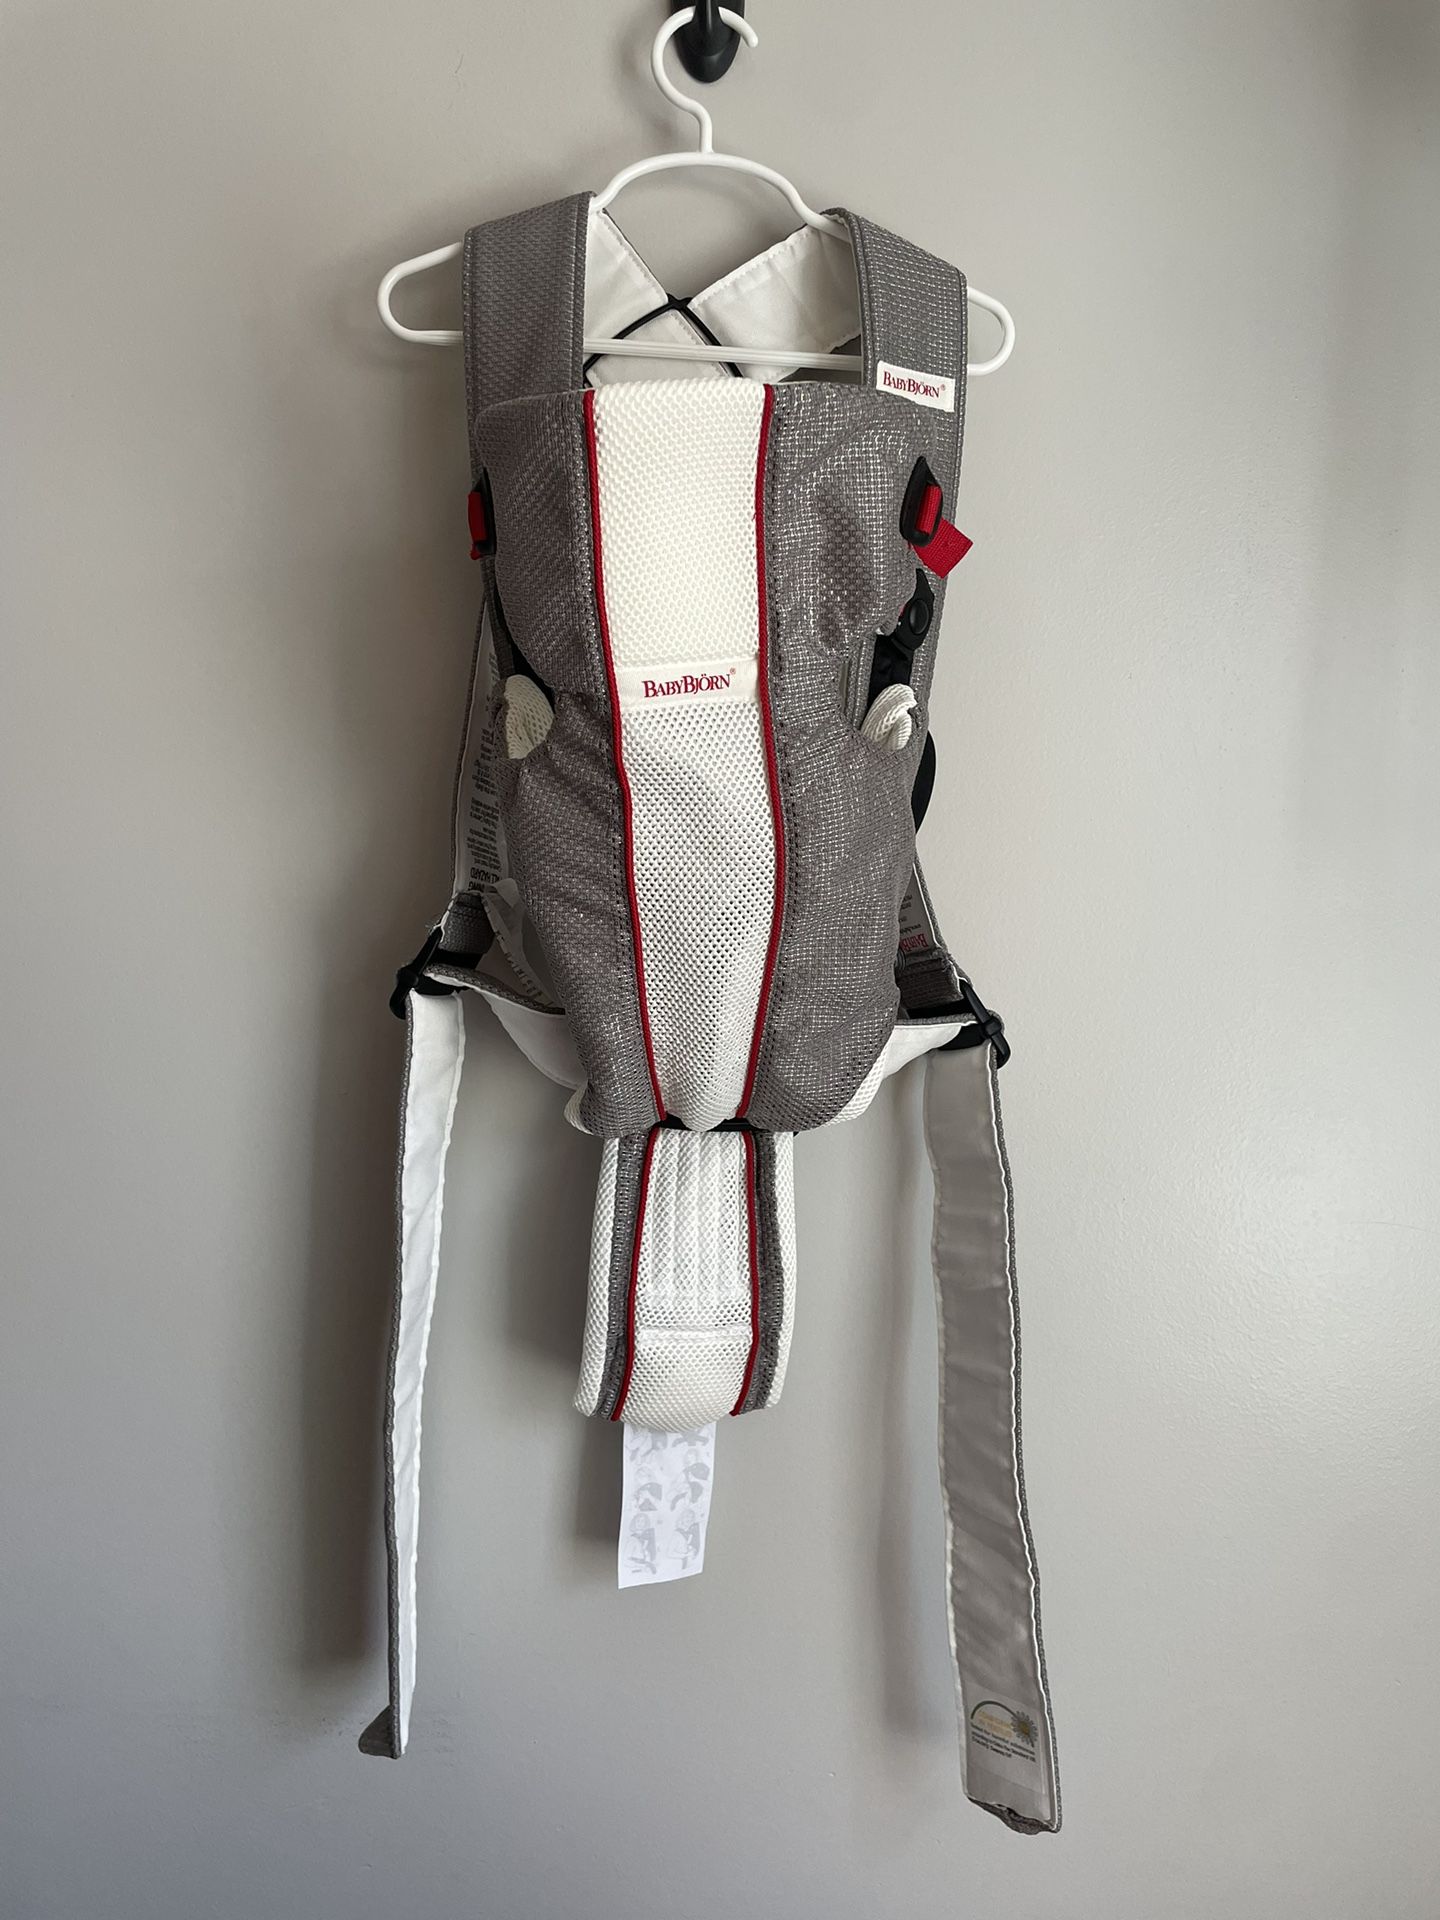 Baby Bjorn Air Mesh Baby Infant Carrier Front & Rear 8-25 Lbs White Gray Red